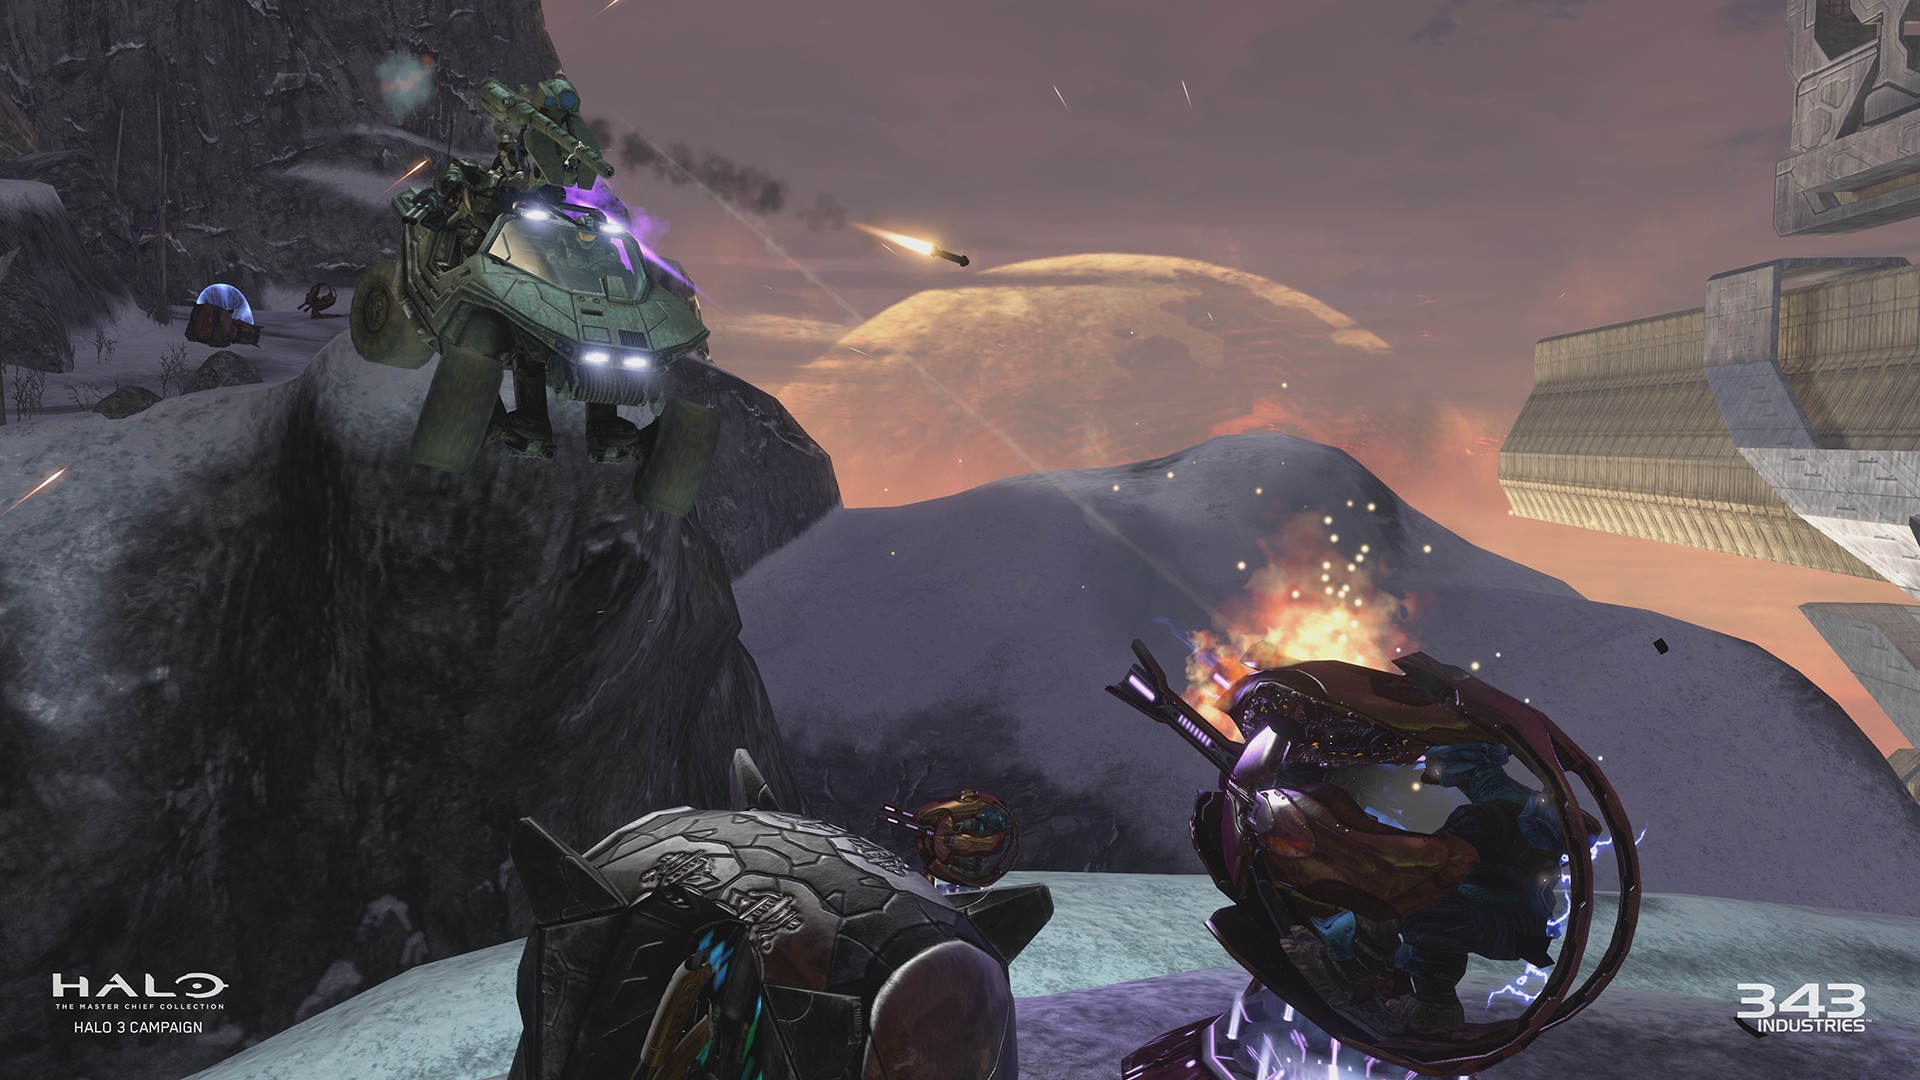 Halo: The Master Chief Collection - screenshot 5